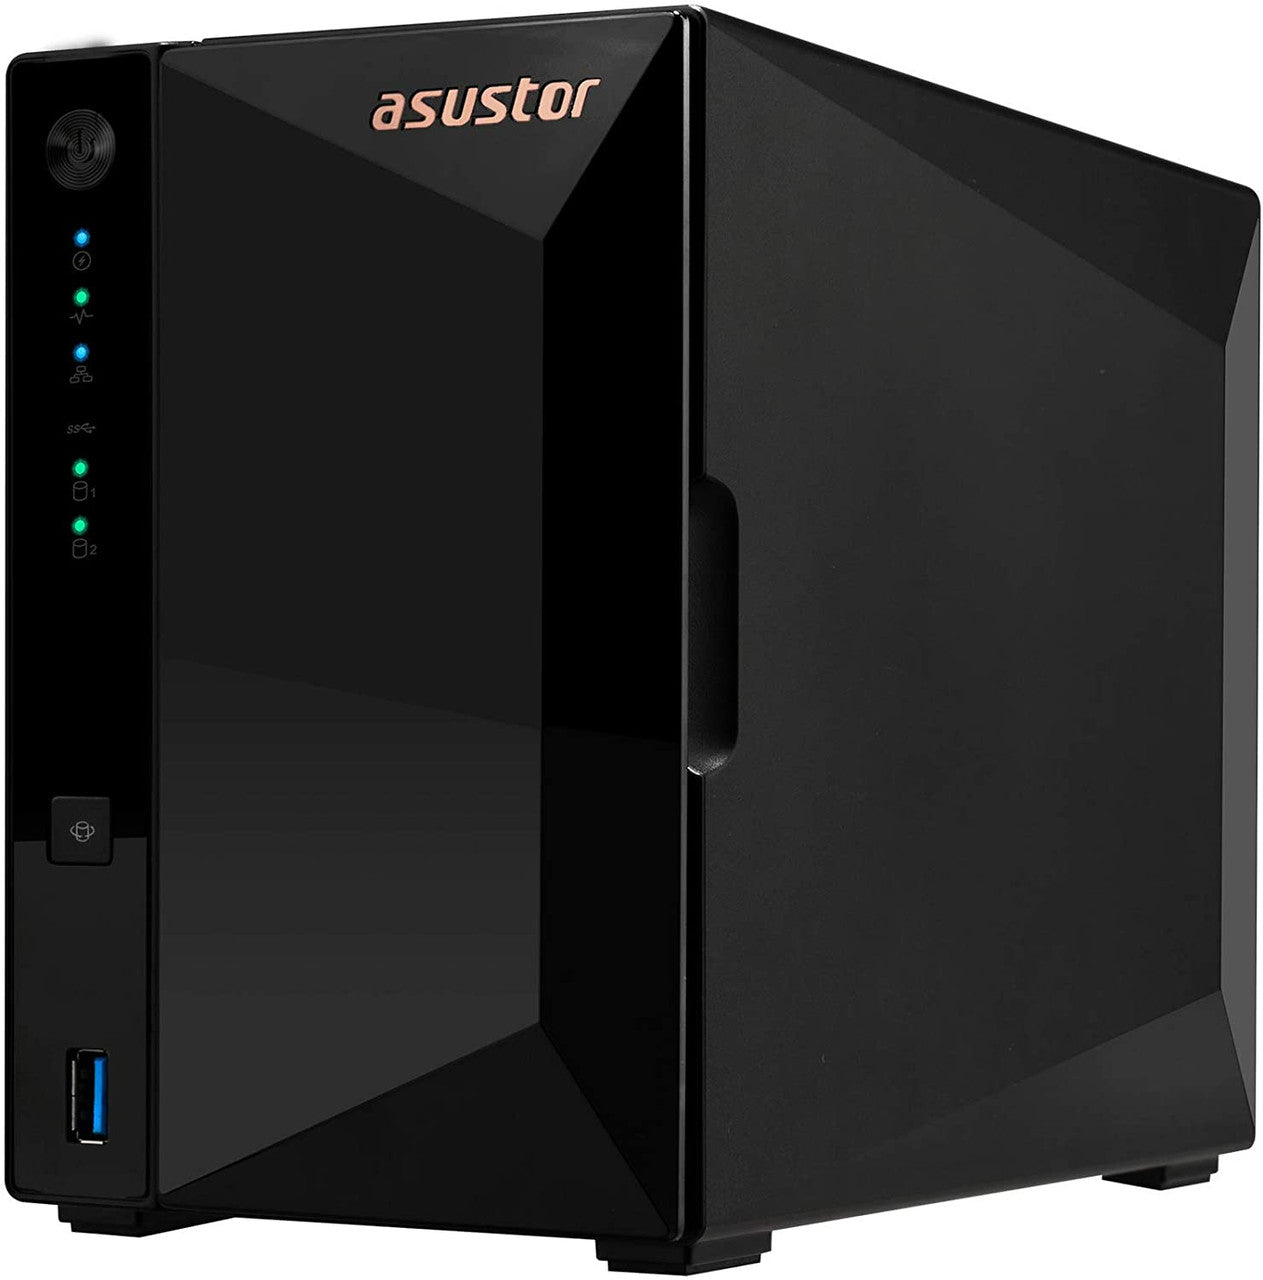 Asustor AS3302T 2-Bay Drivestor 2 PRO NAS with 2GB RAM and 6TB (2x3TB) Western Digital RED Plus Drives Fully Assembled and Tested